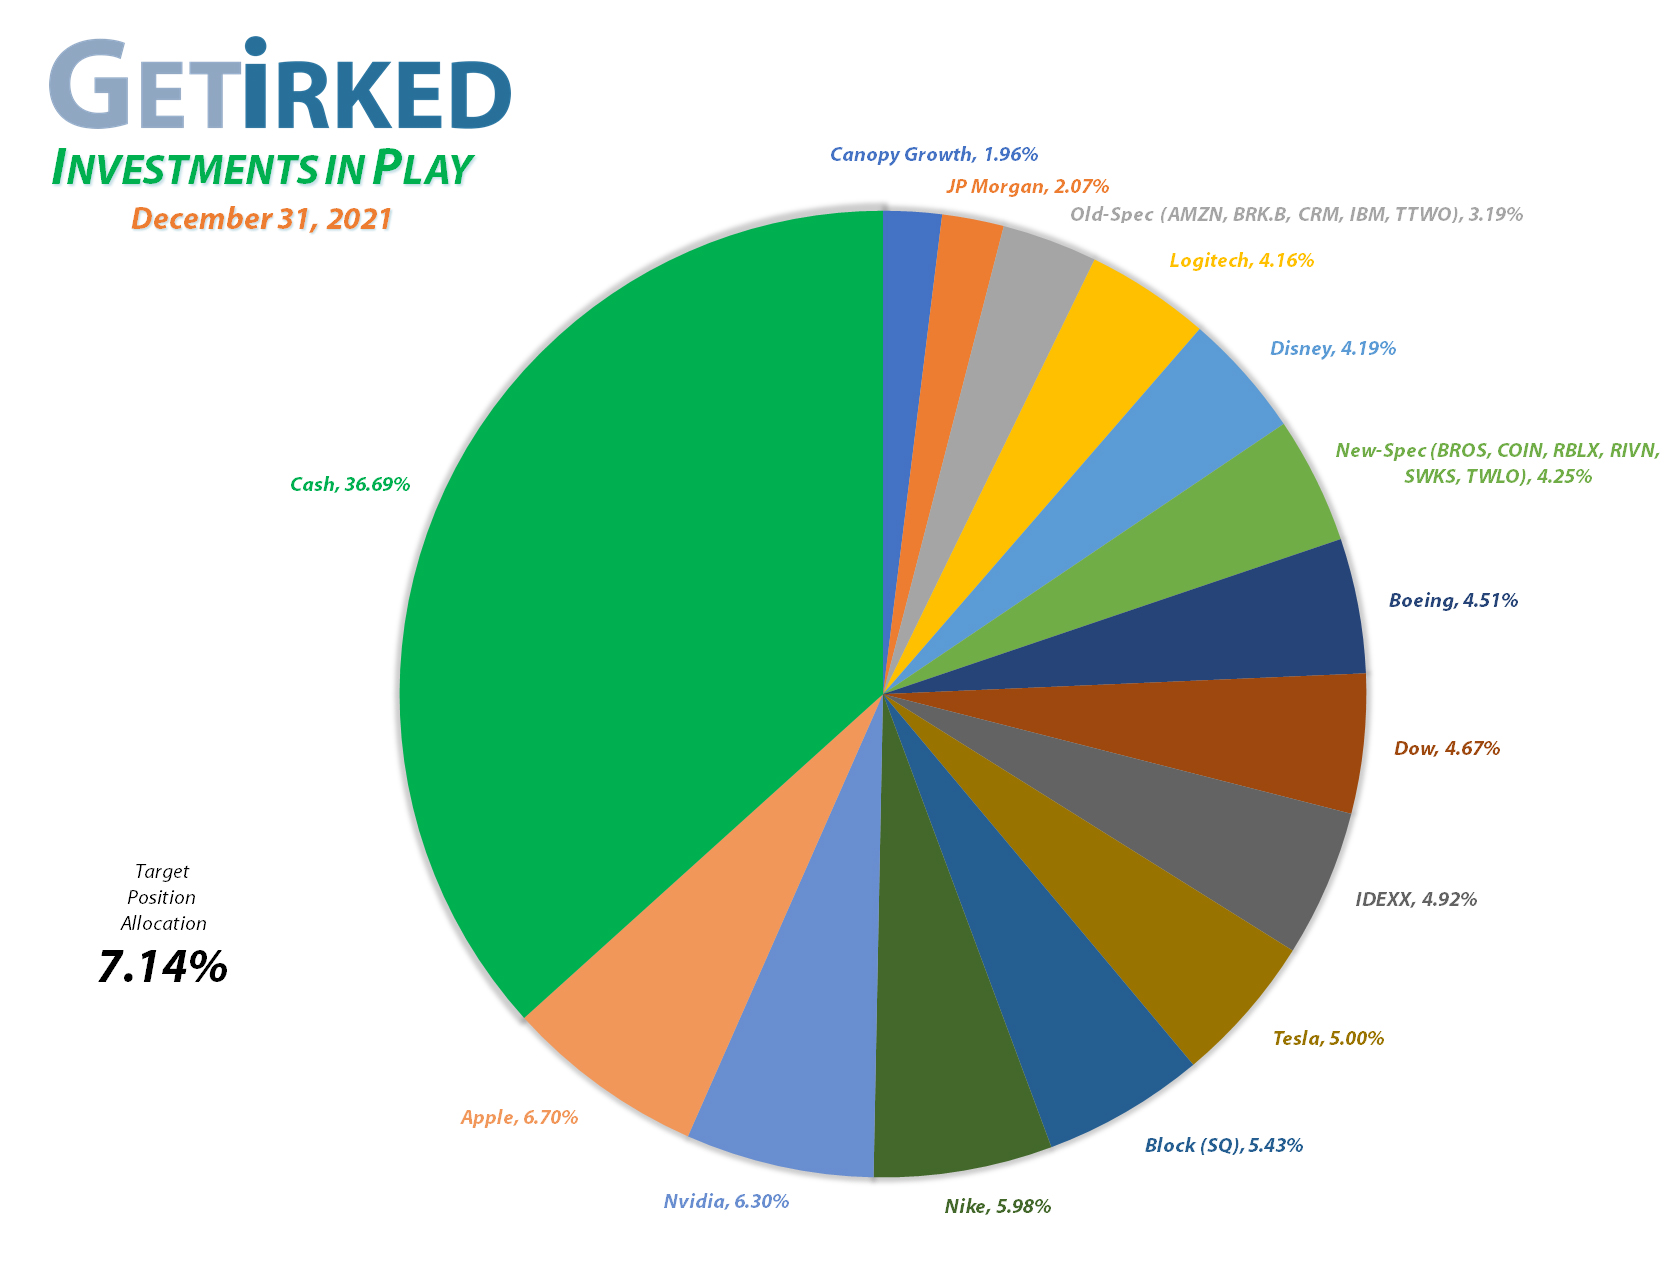 Get Irked - Investments in Play - Current Holdings - March 12, 2021et Irked's Pandemic Portfolio Holdings as of December 31, 2021